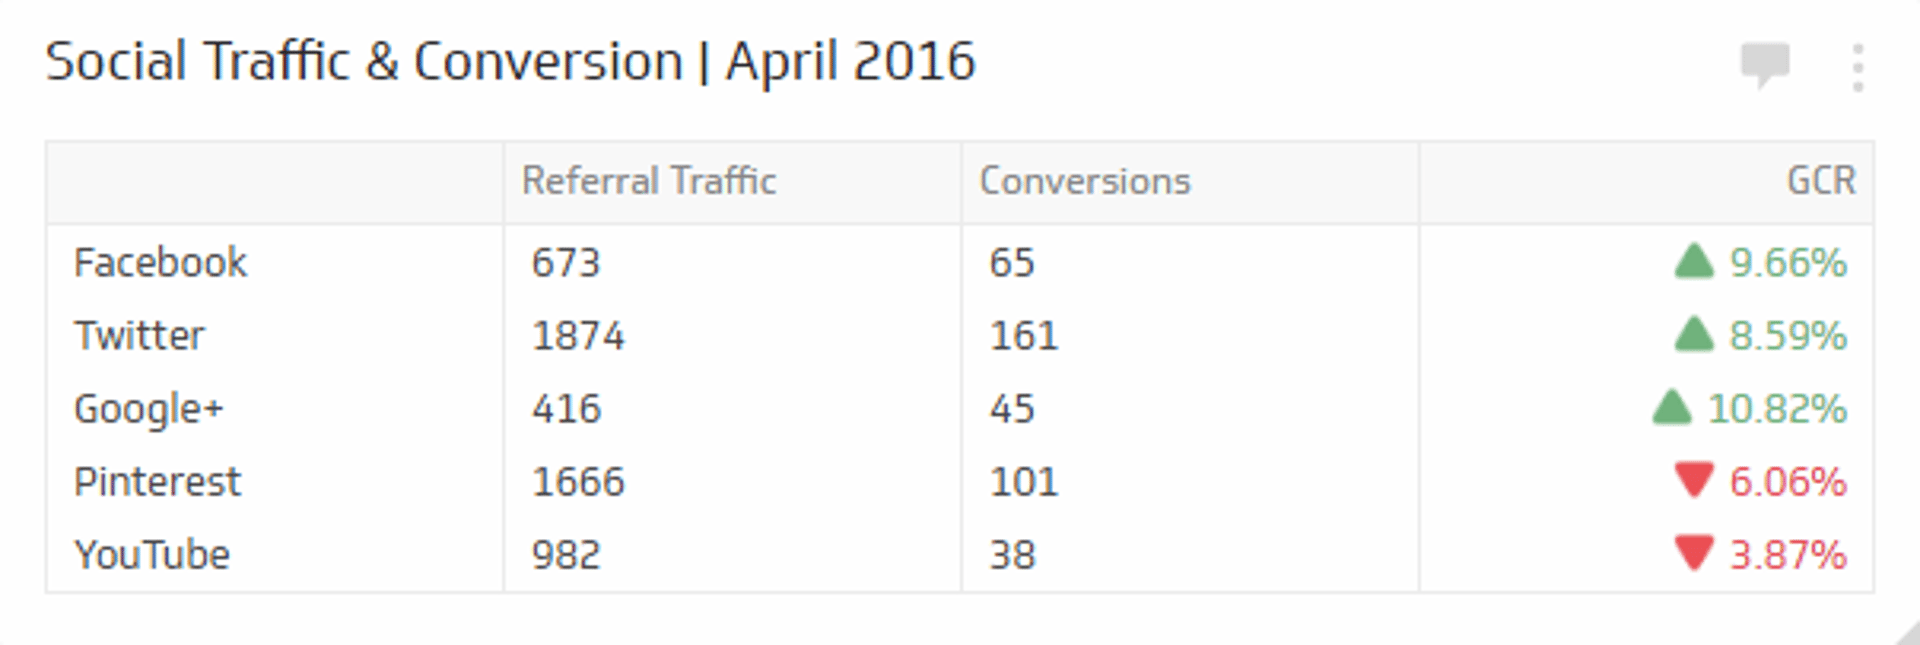 Social Traffic and Conversions